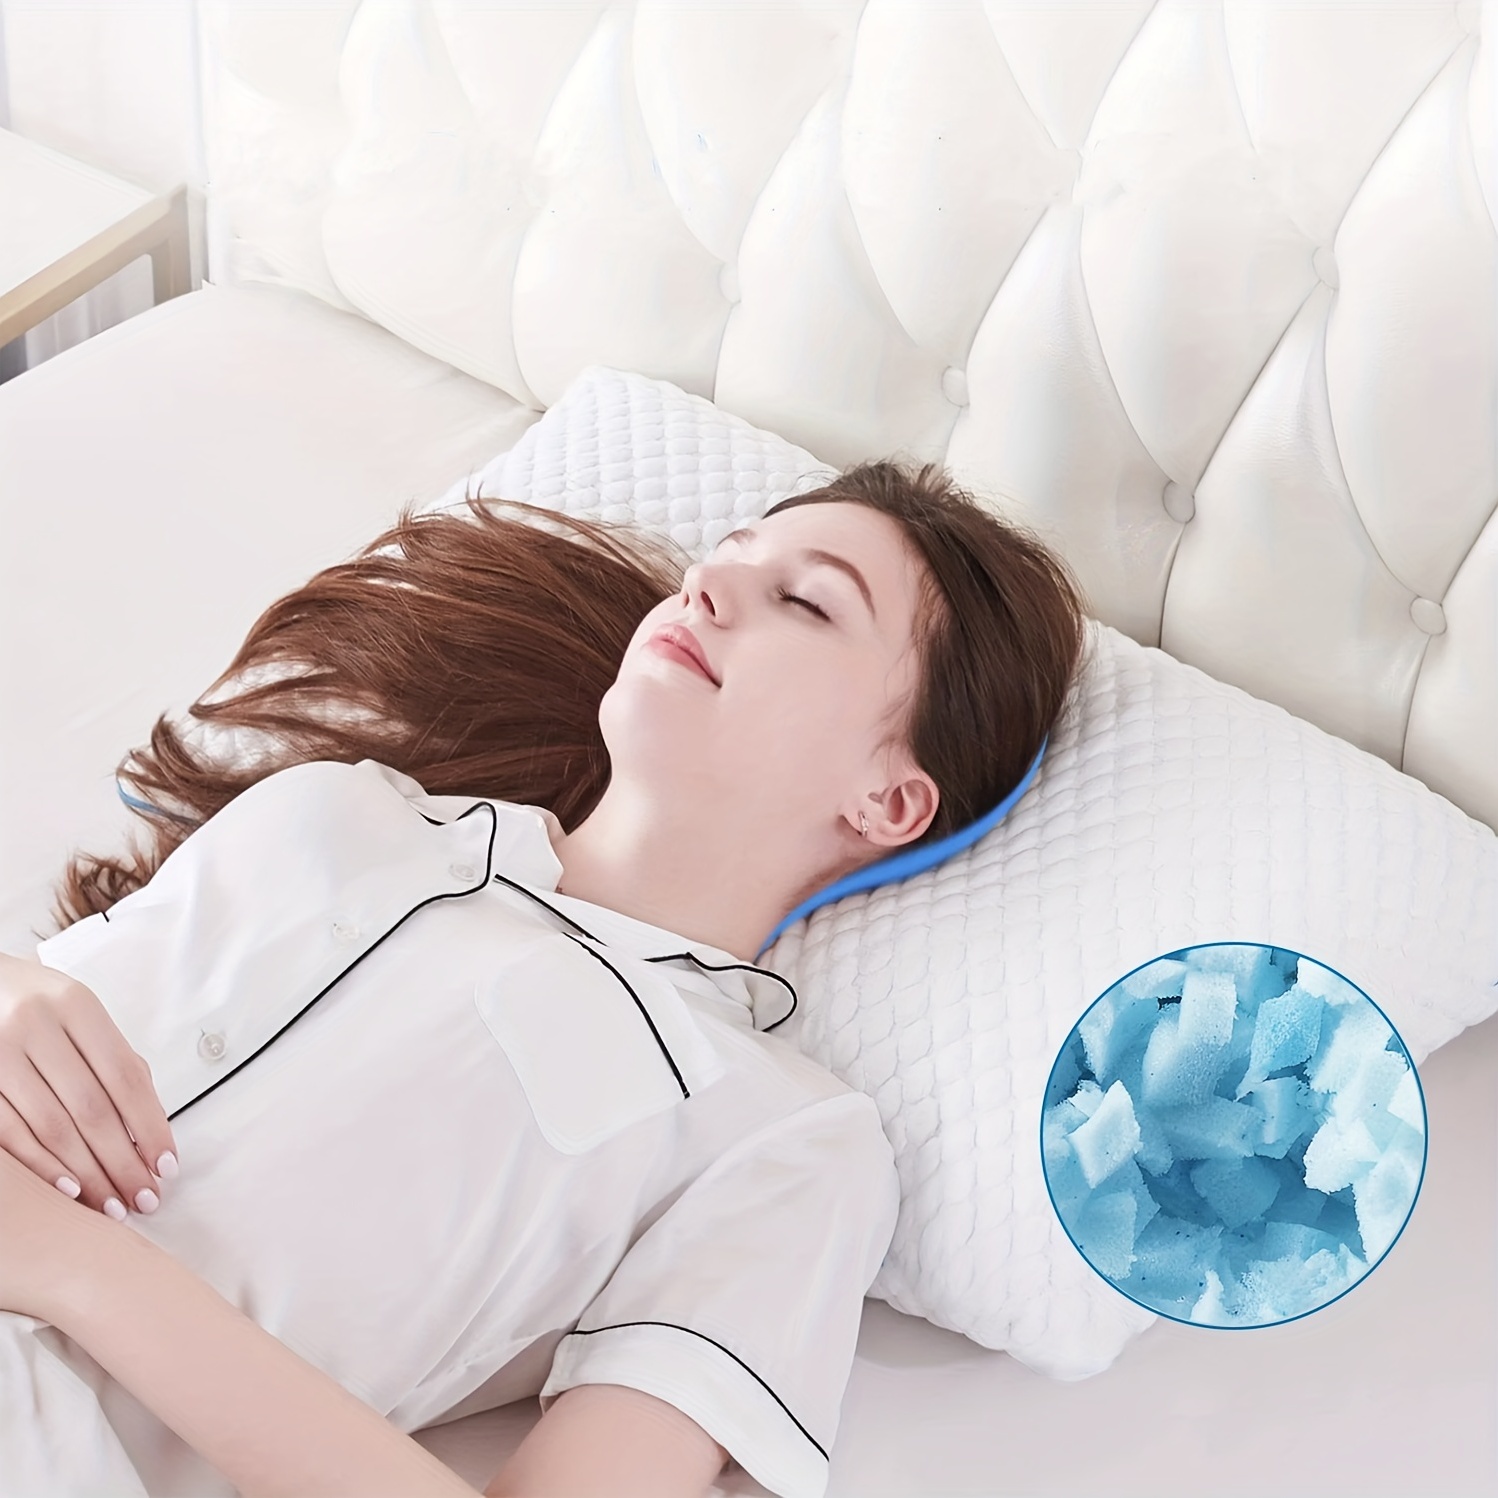 2PCS Cooling Gel Pillow, Memory Foam Pillow for Sleeping w/ Washable Pillow  Case